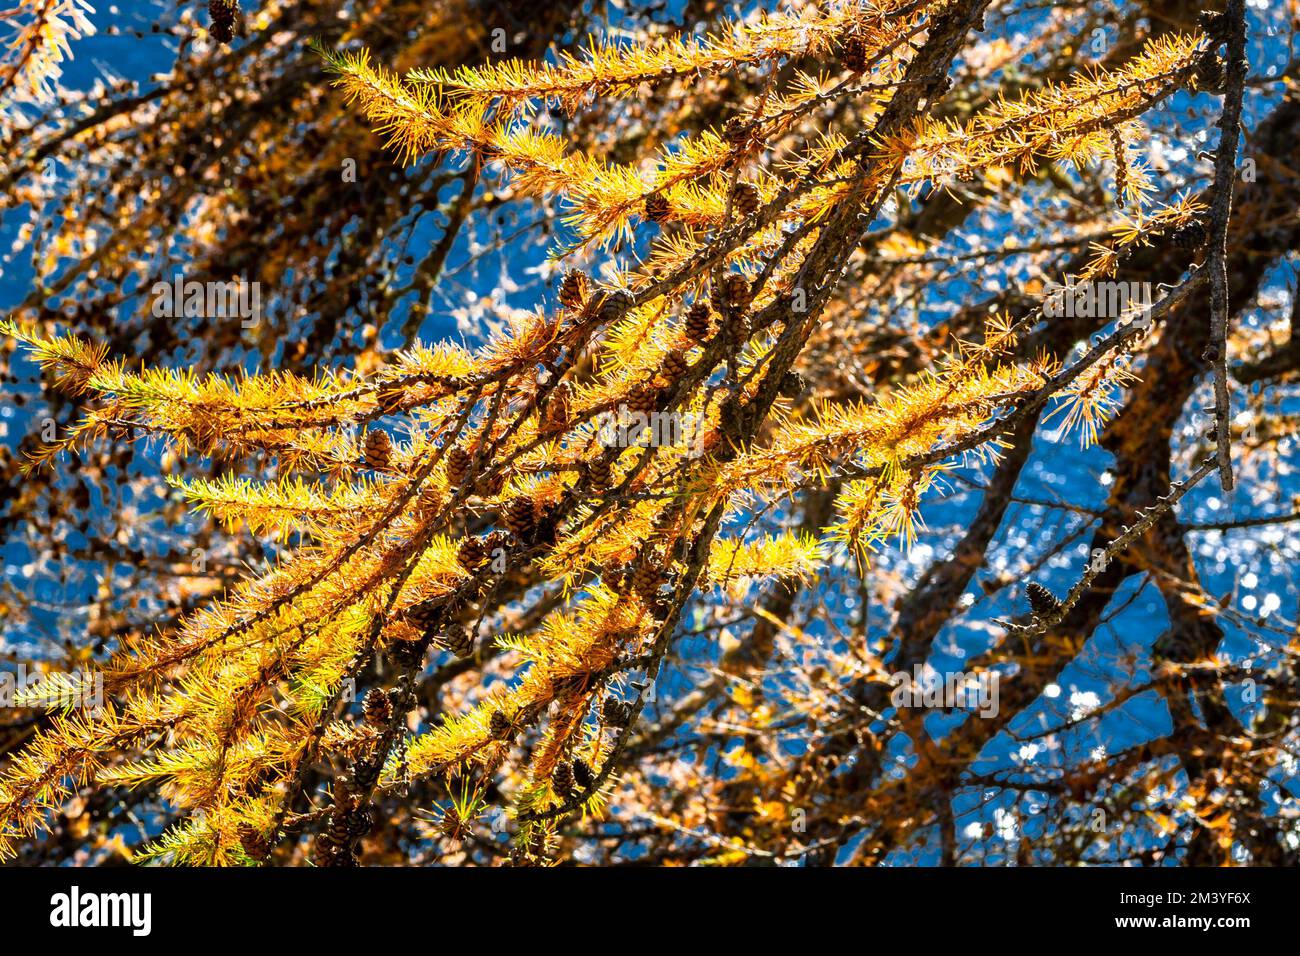 Yellow needles and cones of a larch tree against a blue background Stock Photo